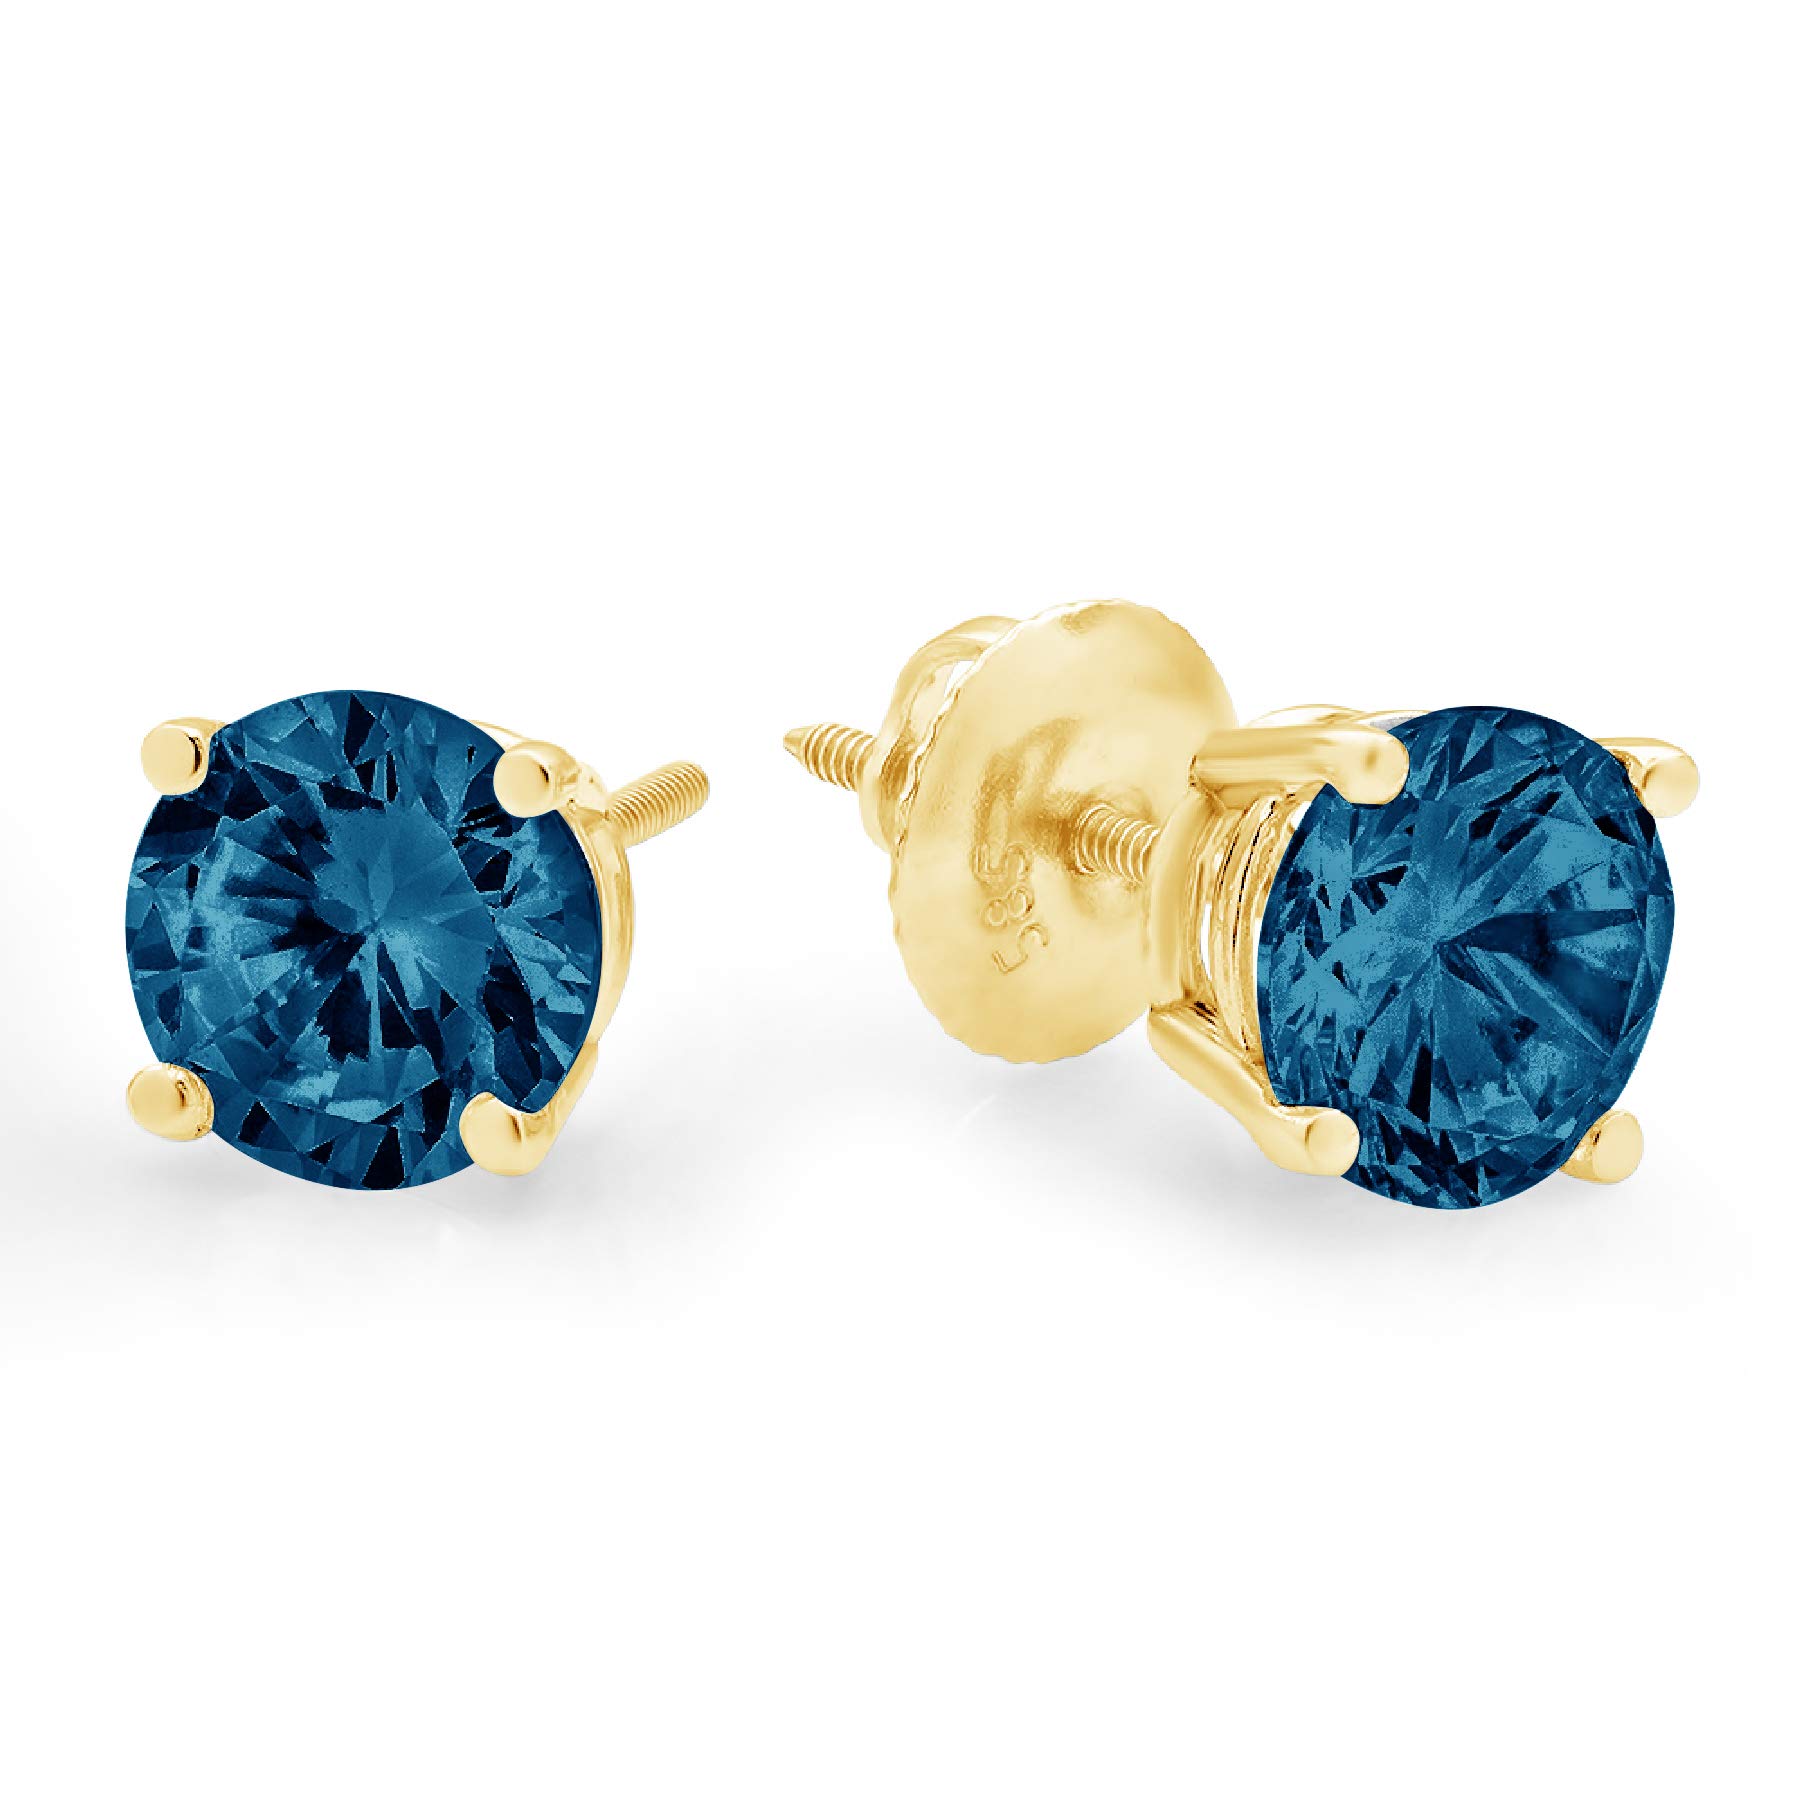 4.0 ct Round Cut ideal VVS1 Conflict Free Gemstone Solitaire Natural London Blue Topaz gemstone Designer Stud Earrings Solid 14k Yellow Gold Screw Back